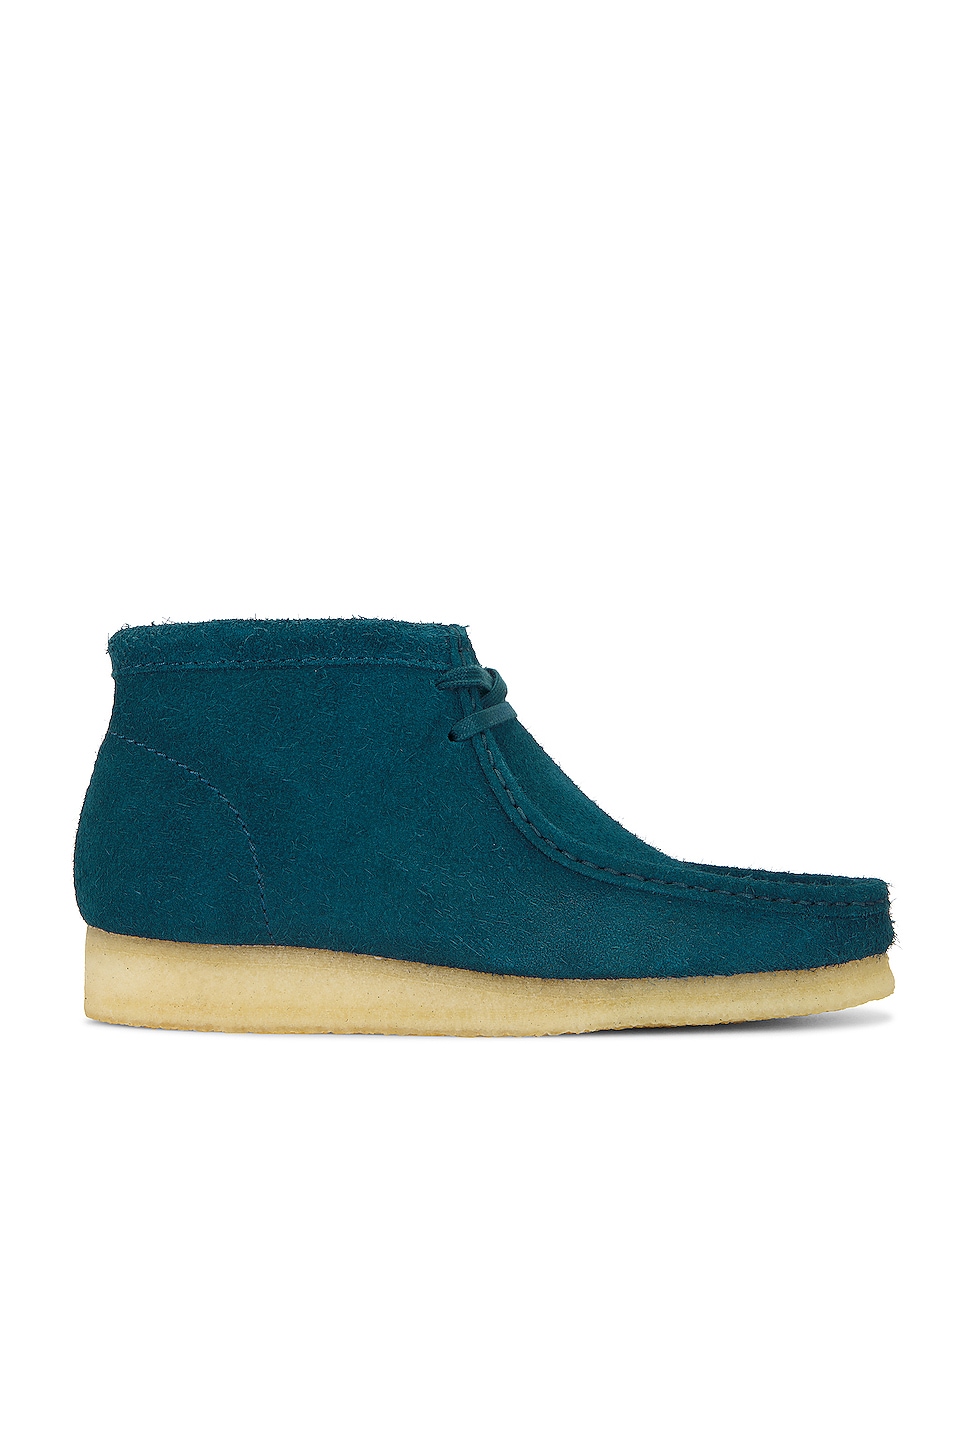 Image 1 of Clarks Wallabee Boot in Deep Blue